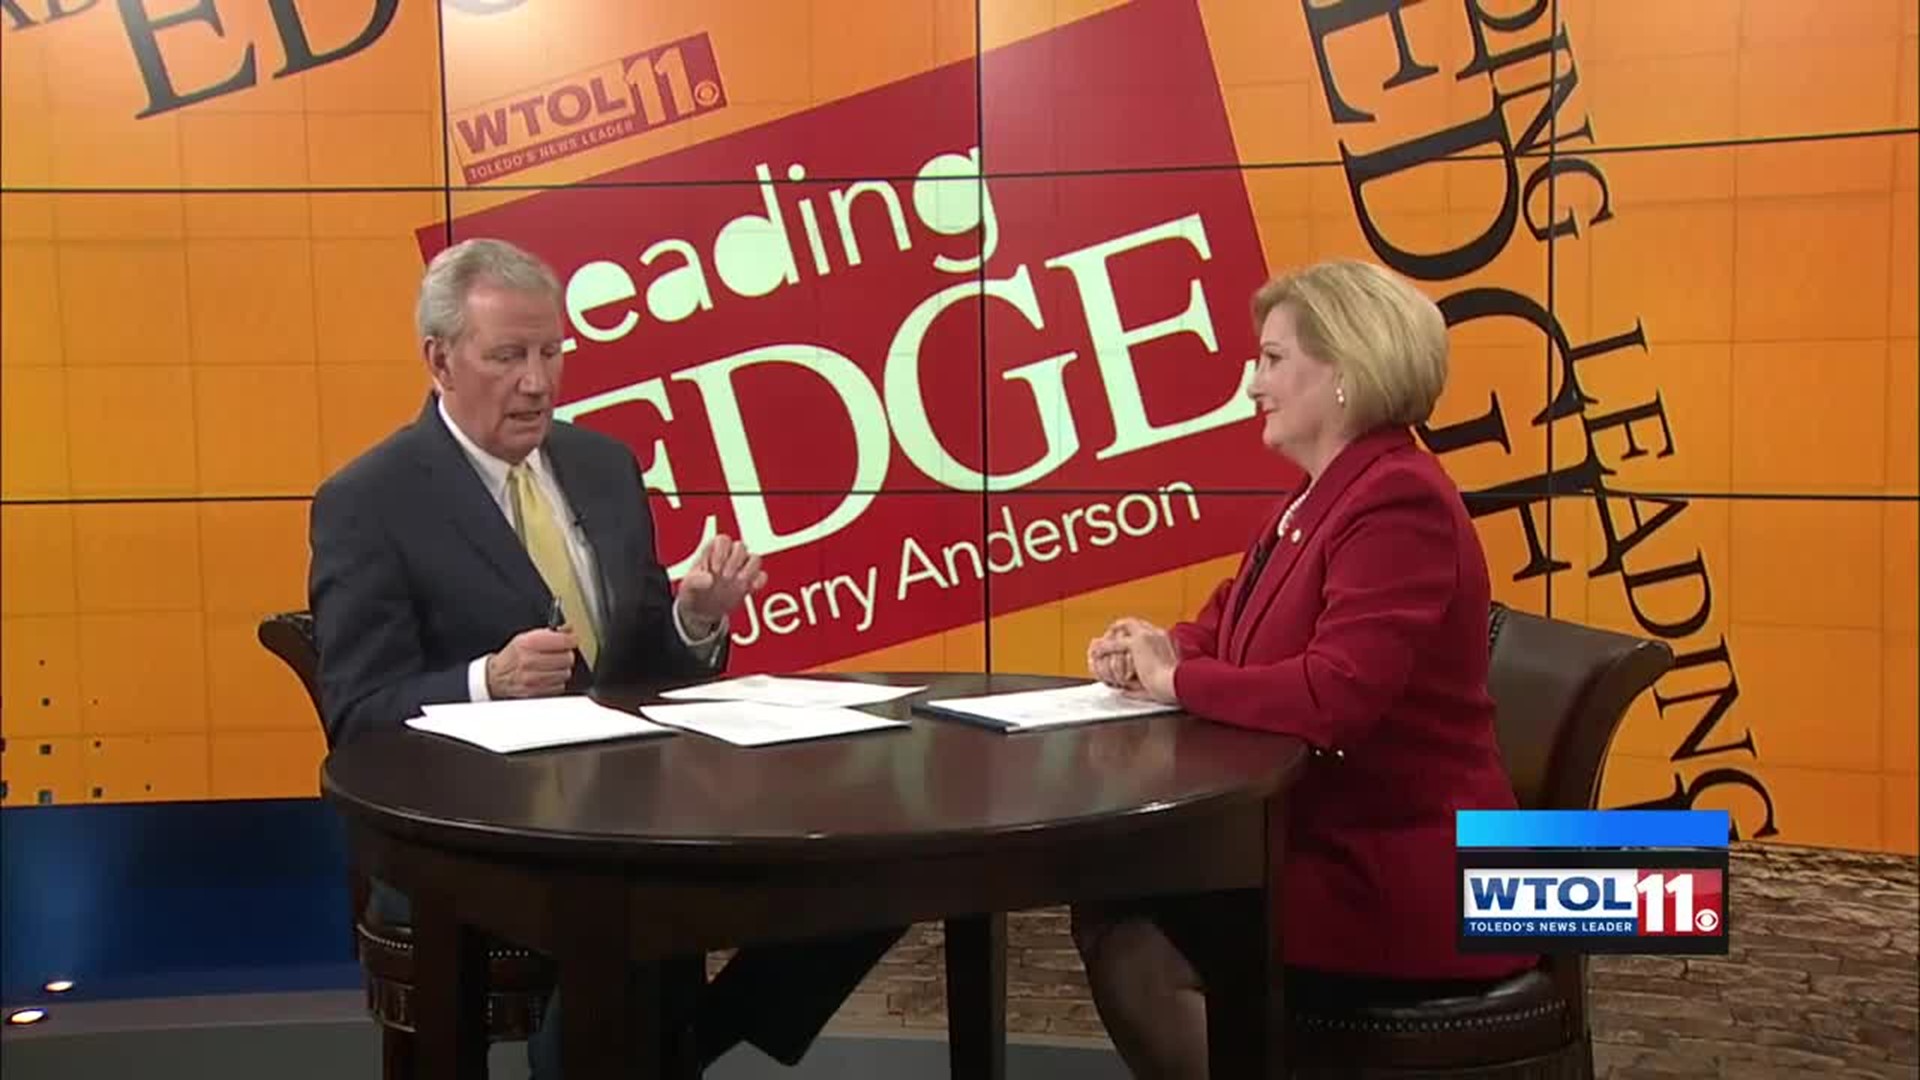 Jerry and Theresa discuss a proposed moratorium on state takeovers of struggling school districts.